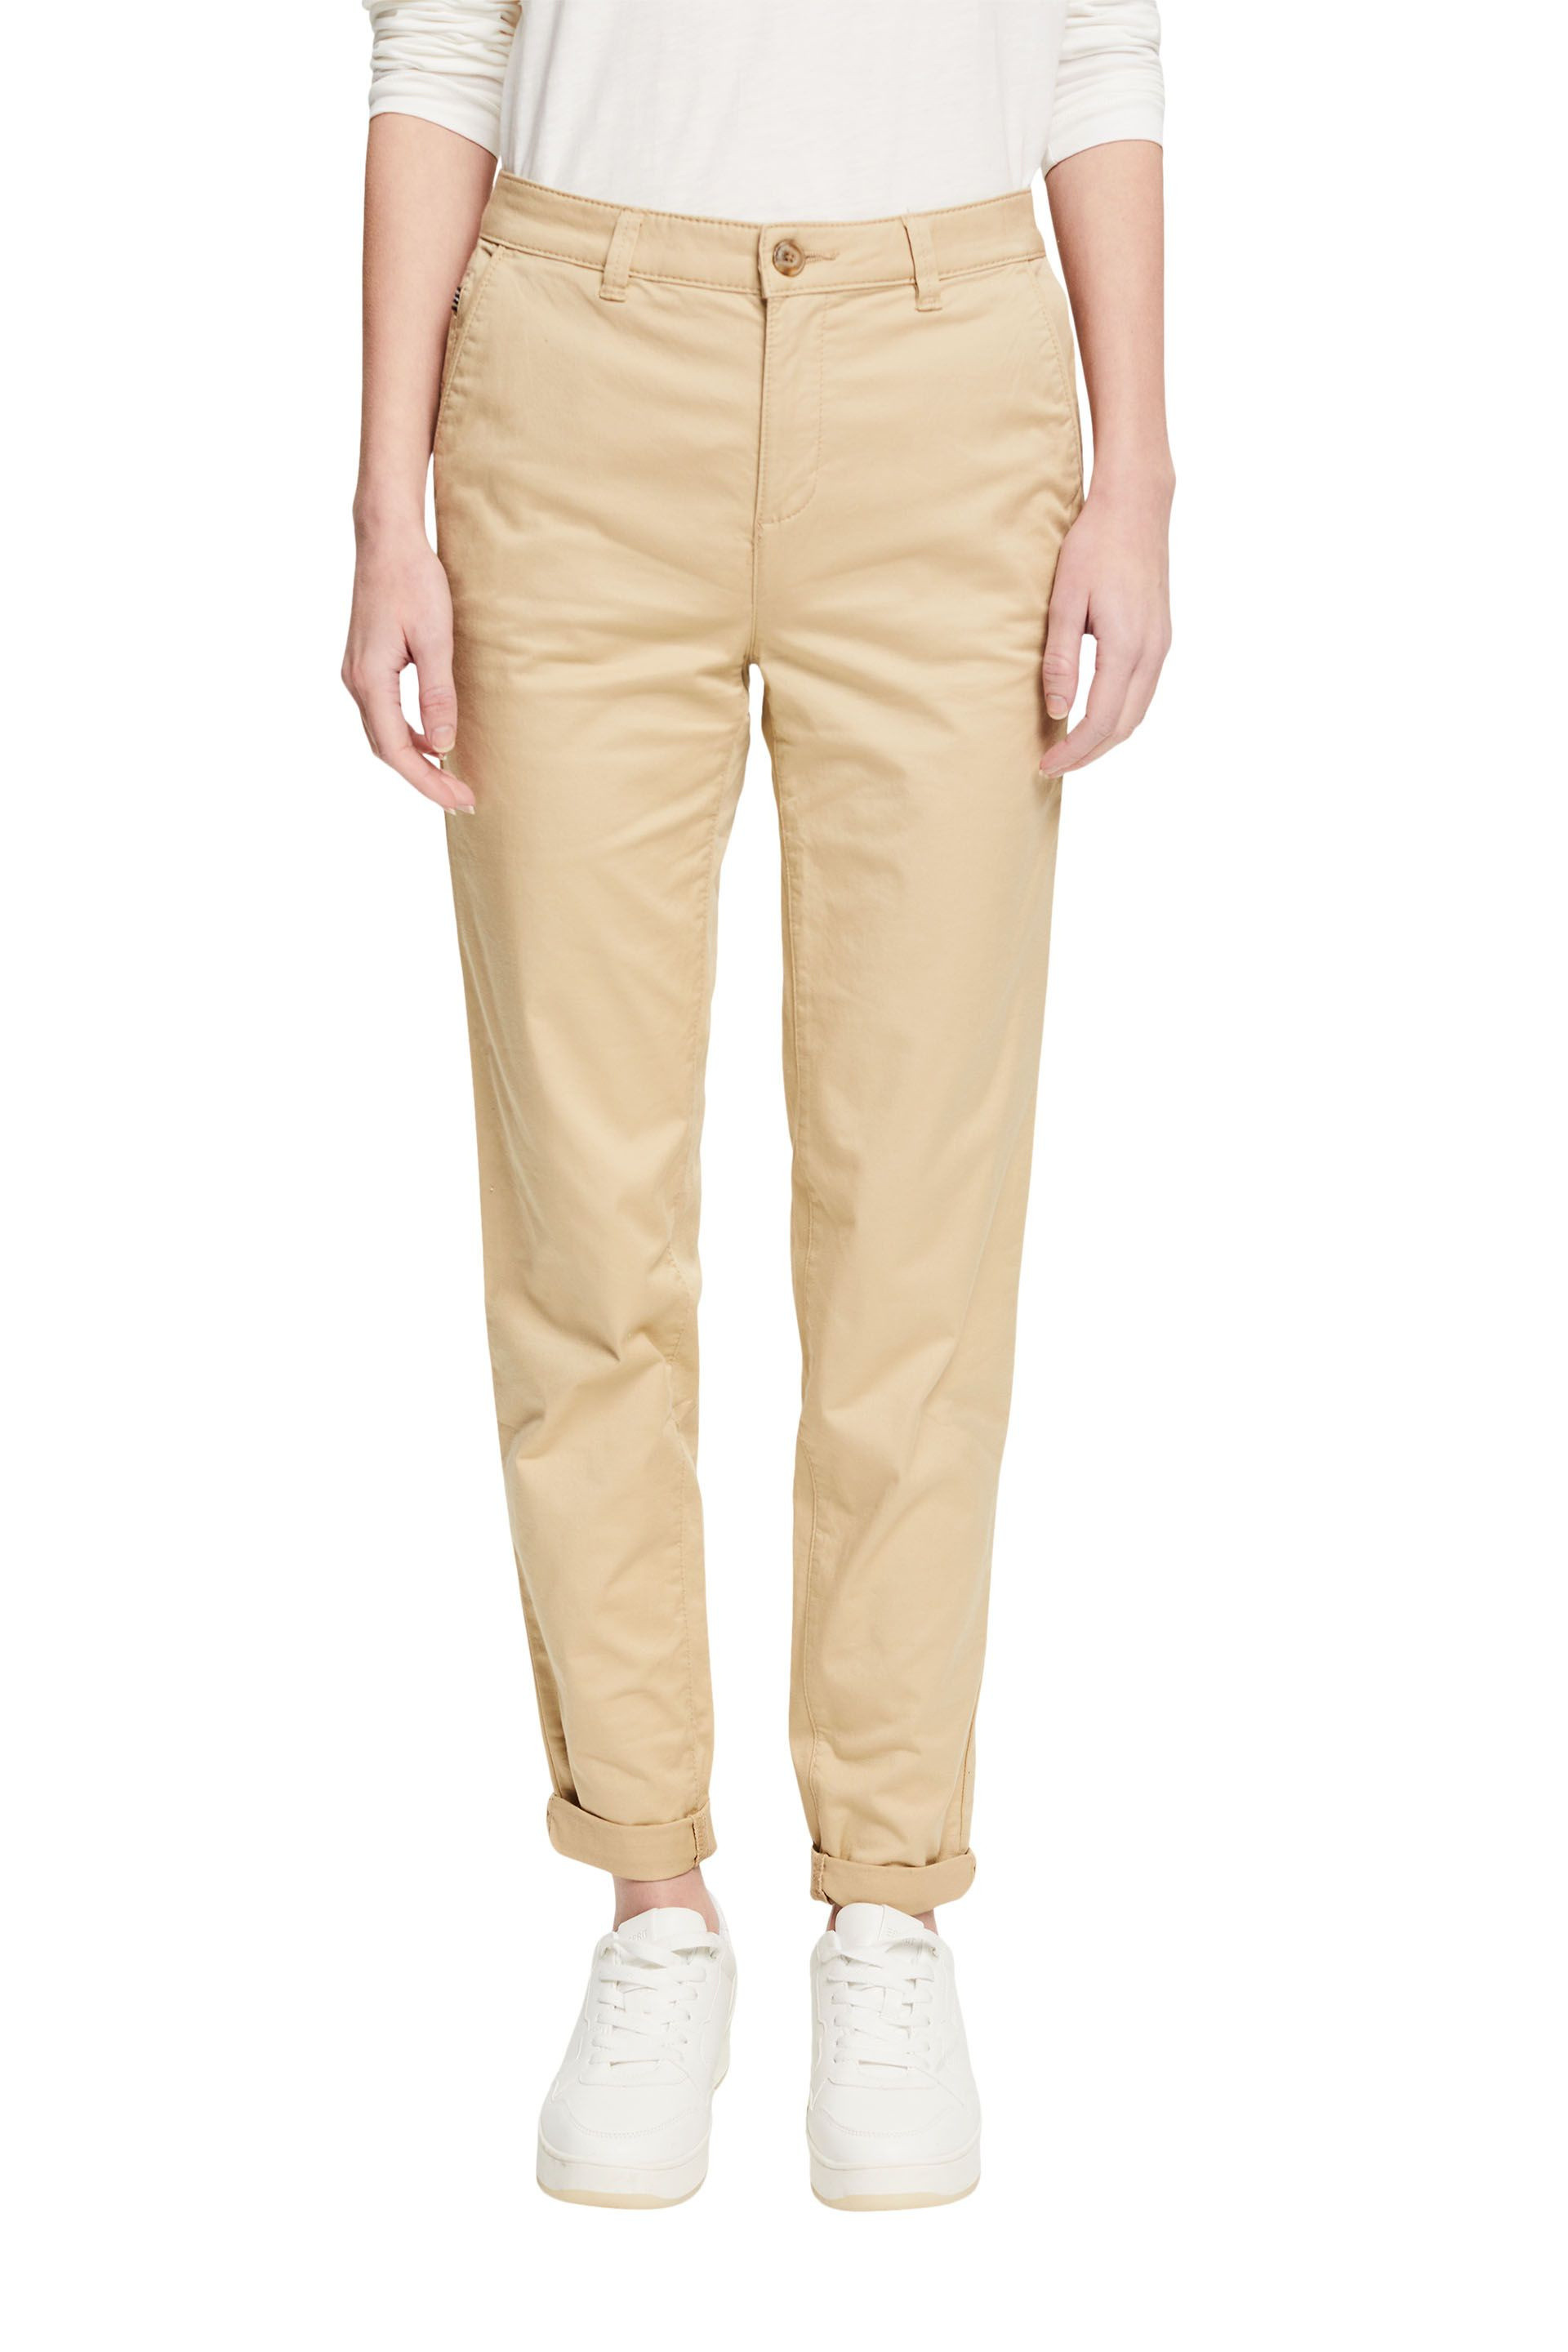 Stretch chino trousers, Beige, large image number 1